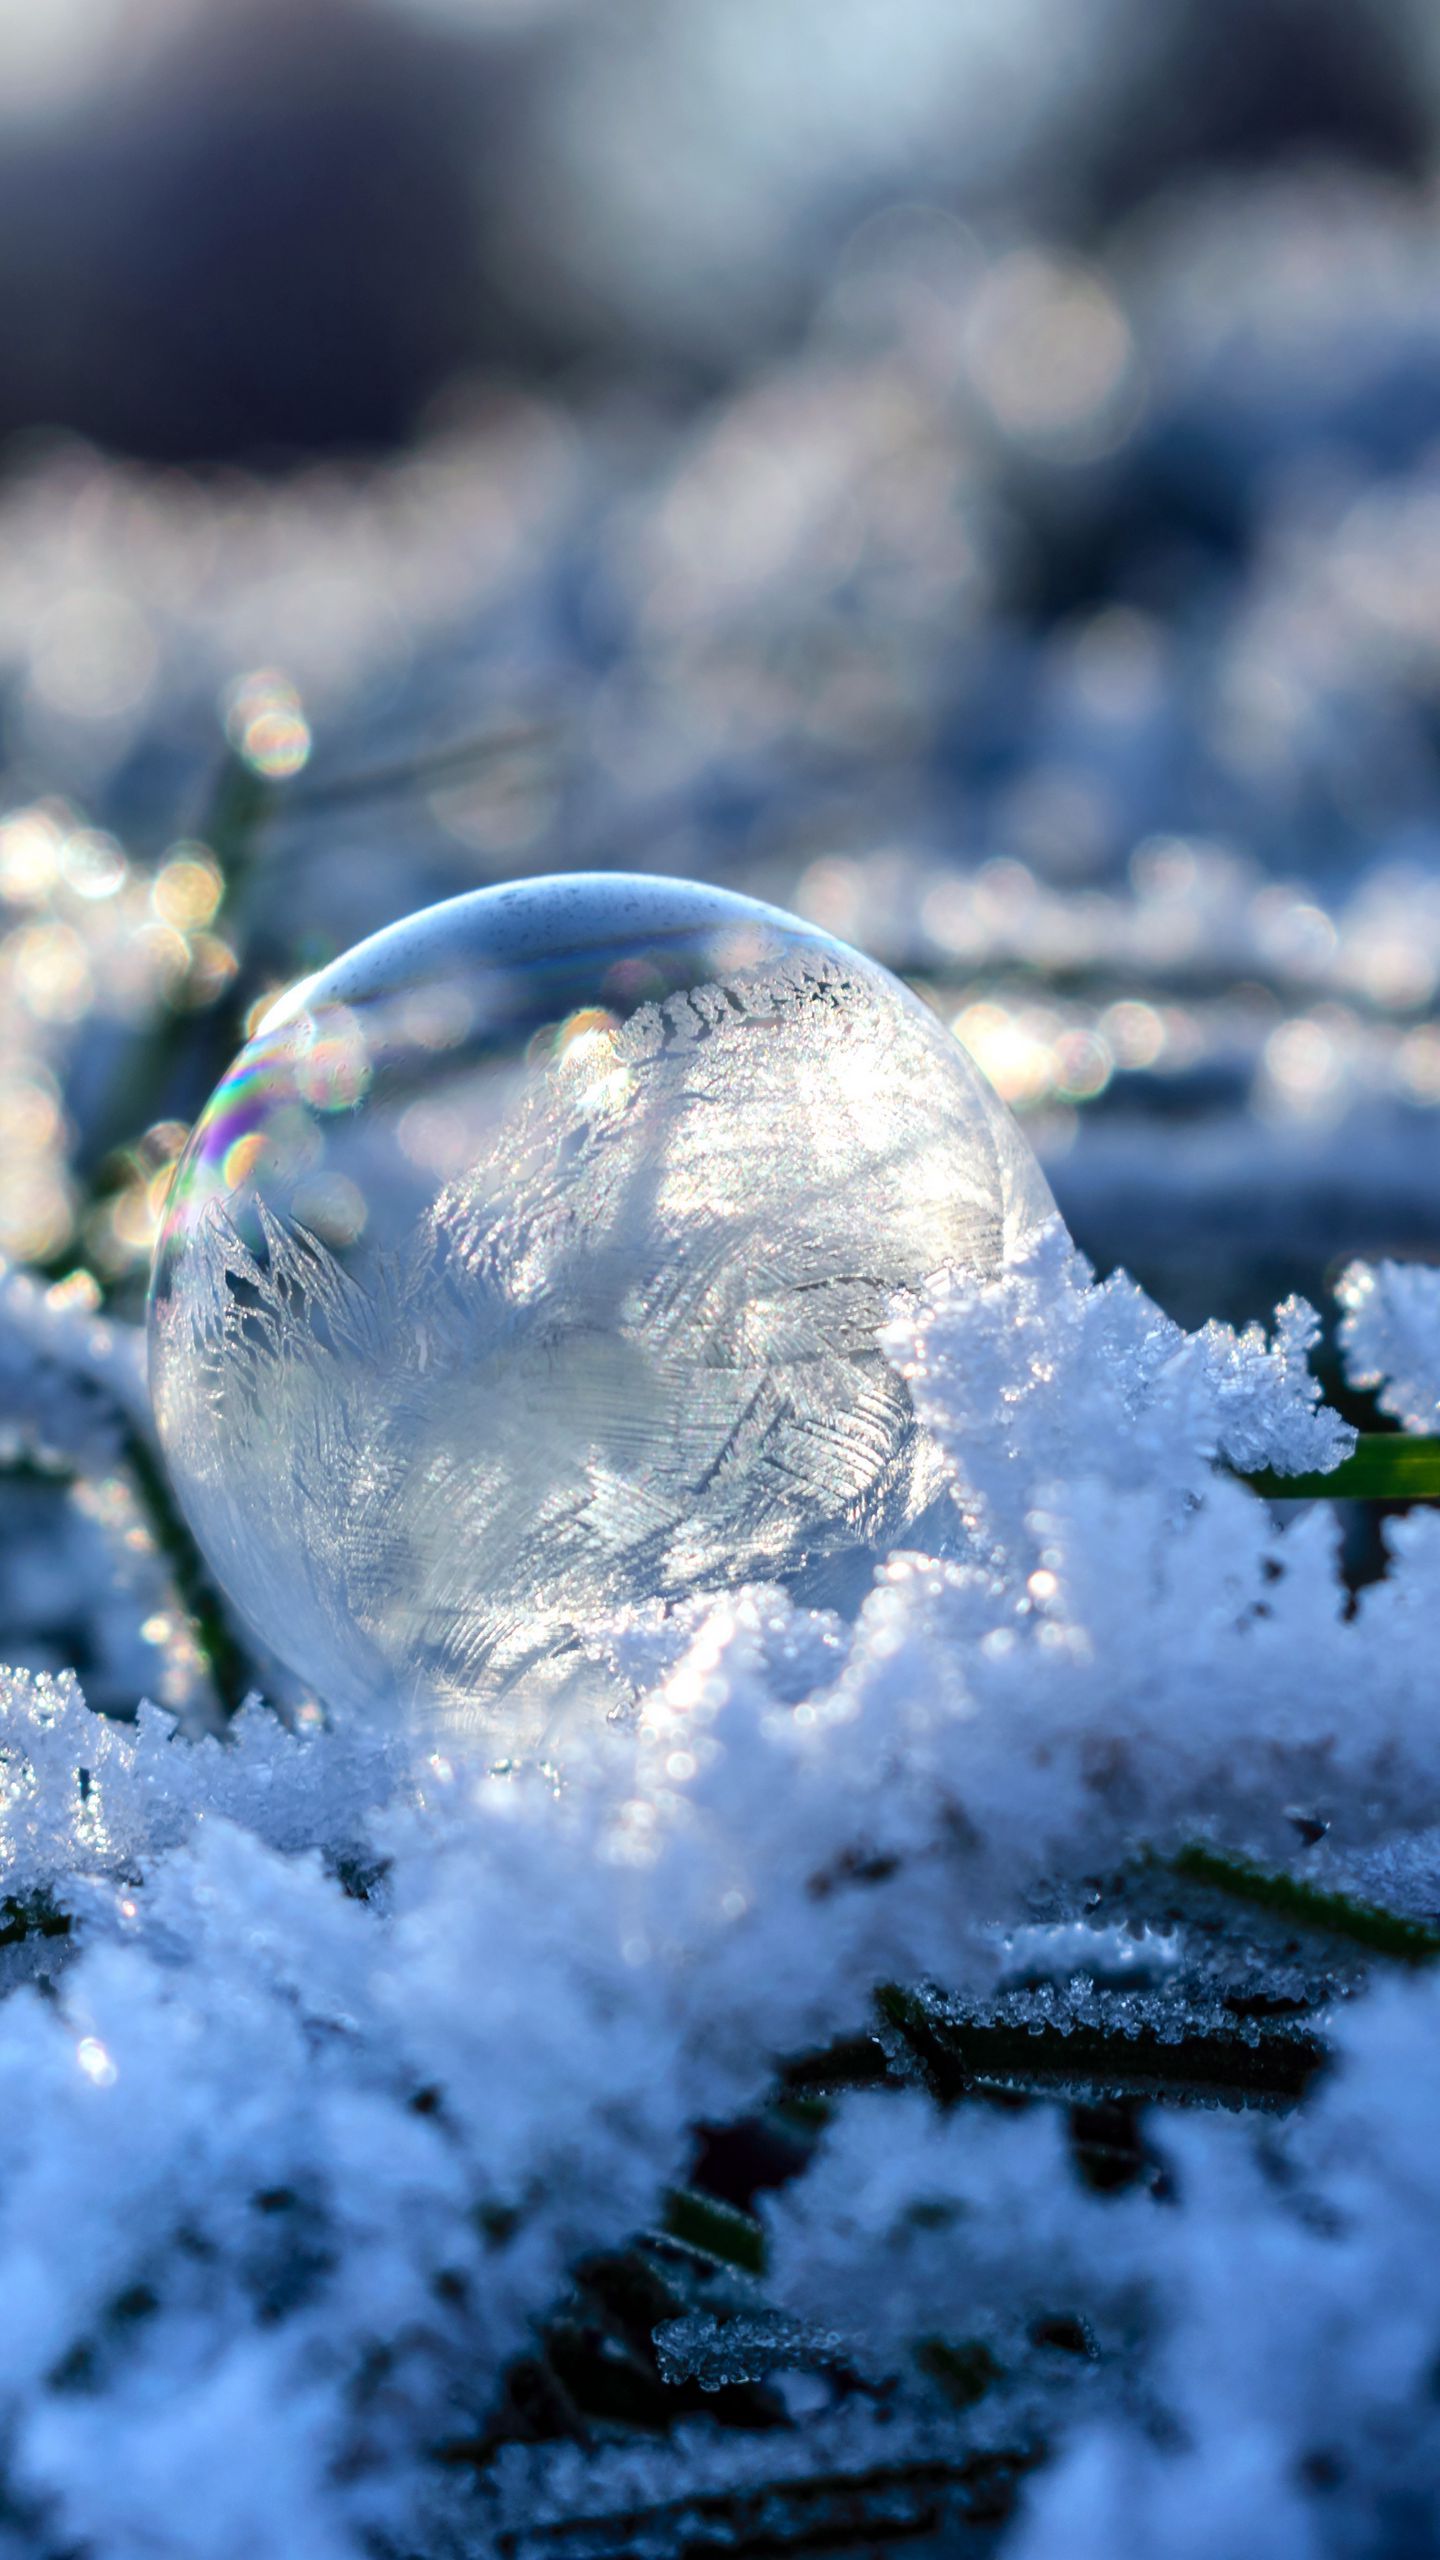 Download wallpaper 1440x2560 bubble, orb, frost, snow qhd samsung galaxy s s edge, note, lg g4 HD background